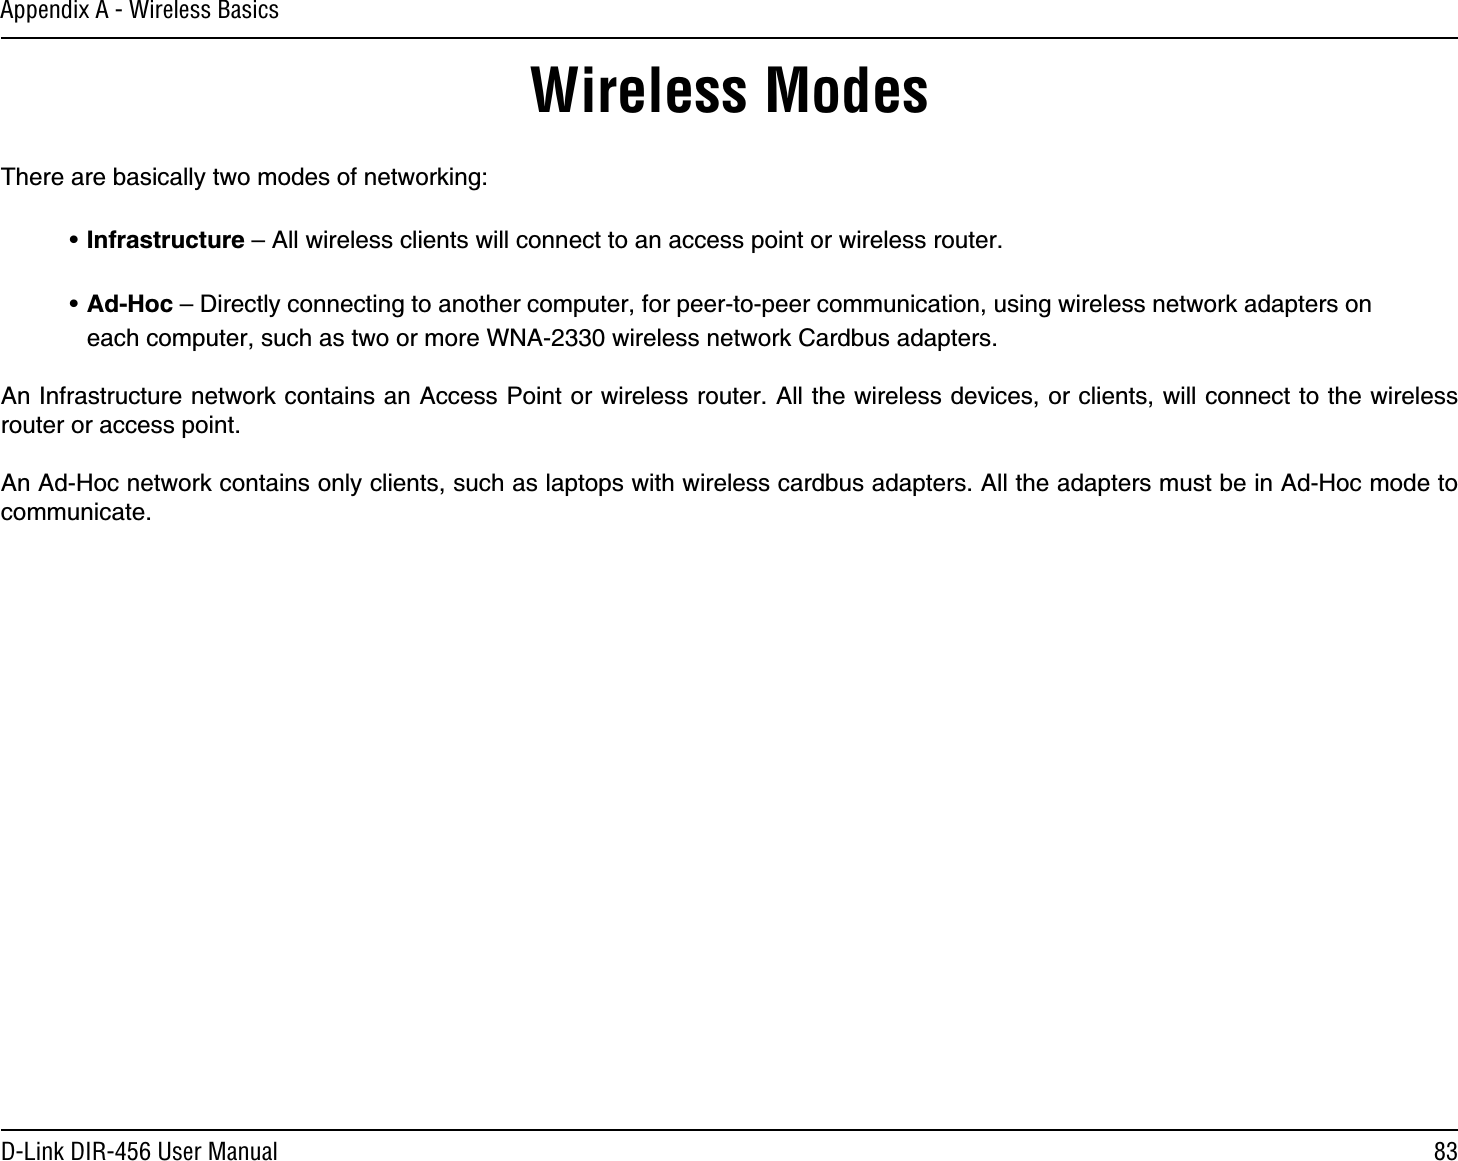 83D-Link DIR-456 User ManualAppendix A - Wireless BasicsThere are basically two modes of networking: • Infrastructure – All wireless clients will connect to an access point or wireless router.• Ad-Hoc – Directly connecting to another computer, for peer-to-peer communication, using wireless network adapters on each computer, such as two or more WNA-2330 wireless network Cardbus adapters.An Infrastructure network contains an Access Point or wireless router. All the wireless devices, or clients, will connect to the wireless router or access point. An Ad-Hoc network contains only clients, such as laptops with wireless cardbus adapters. All the adapters must be in Ad-Hoc mode to communicate.Wireless Modes